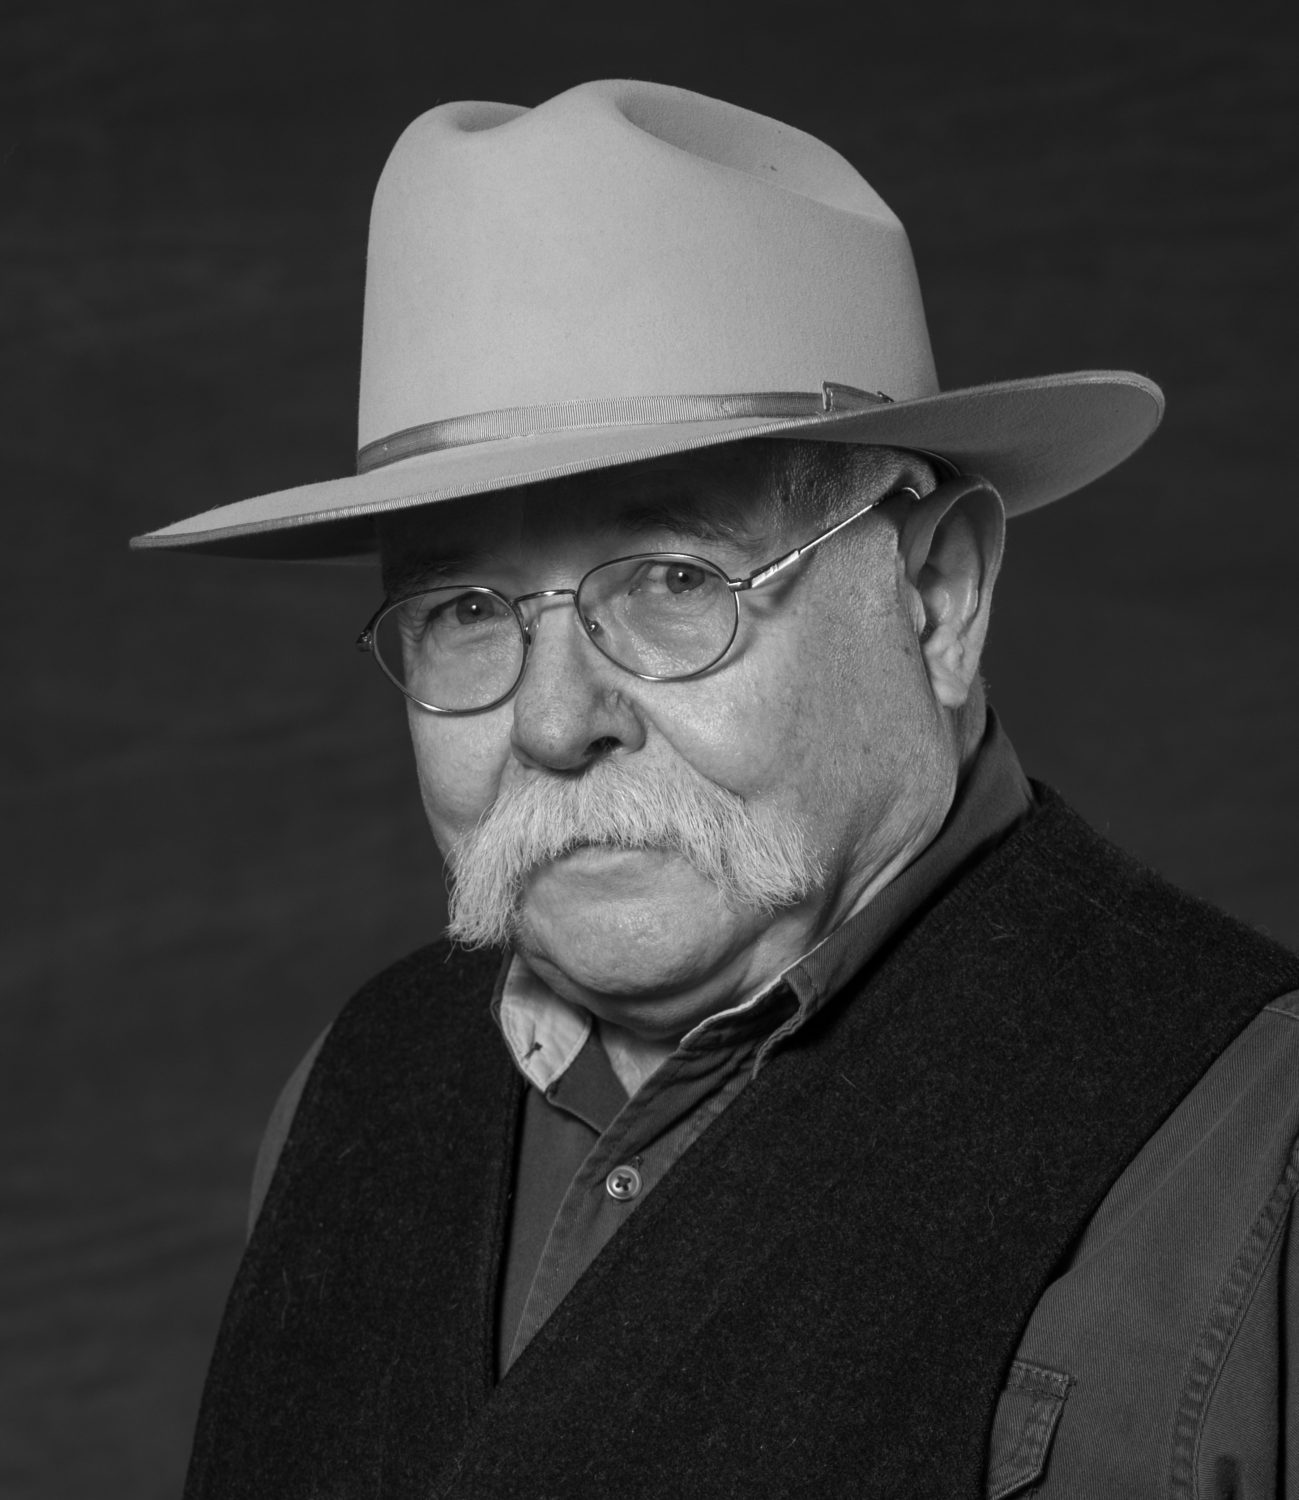 photo in hat and vest, taken at National Cowboy Poetry Gathering